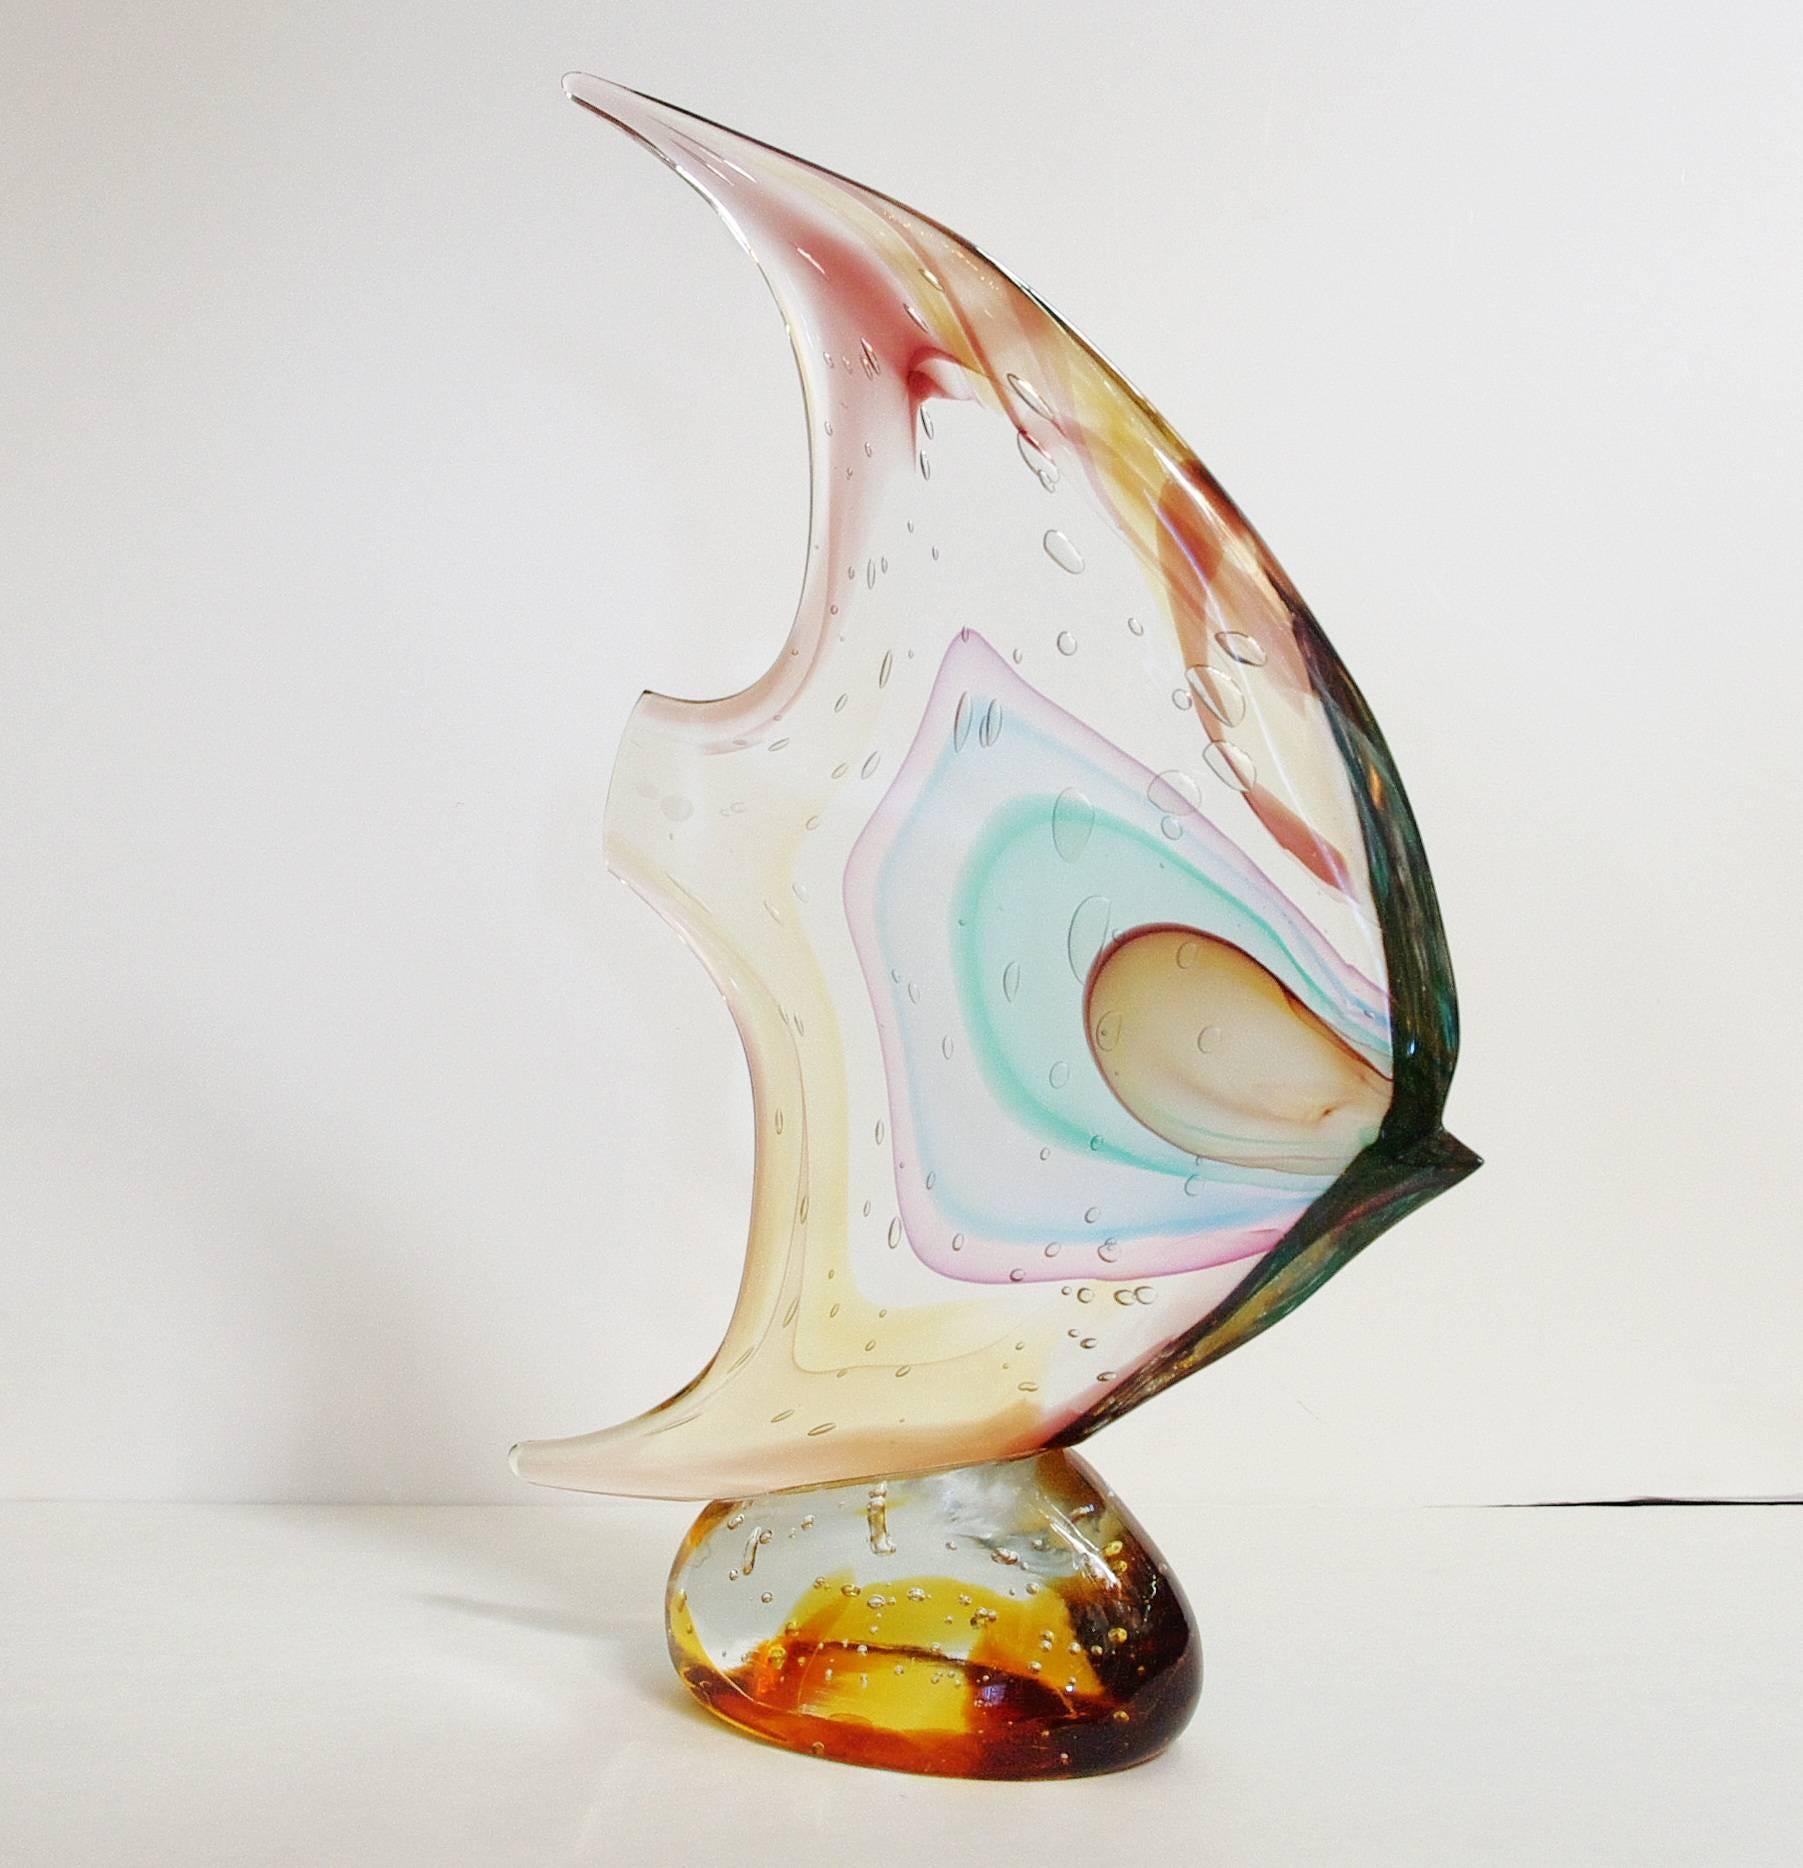 Italian Murano glass fish on pebble sculpture, hand blown and crafted in multiple colors of Murano glass by Sergio Constantini 
Signed “Constantini S.” on the base / Made in Italy in the 1980’s
Height: 18 inches / Width: 13 inches / Depth: 3.5